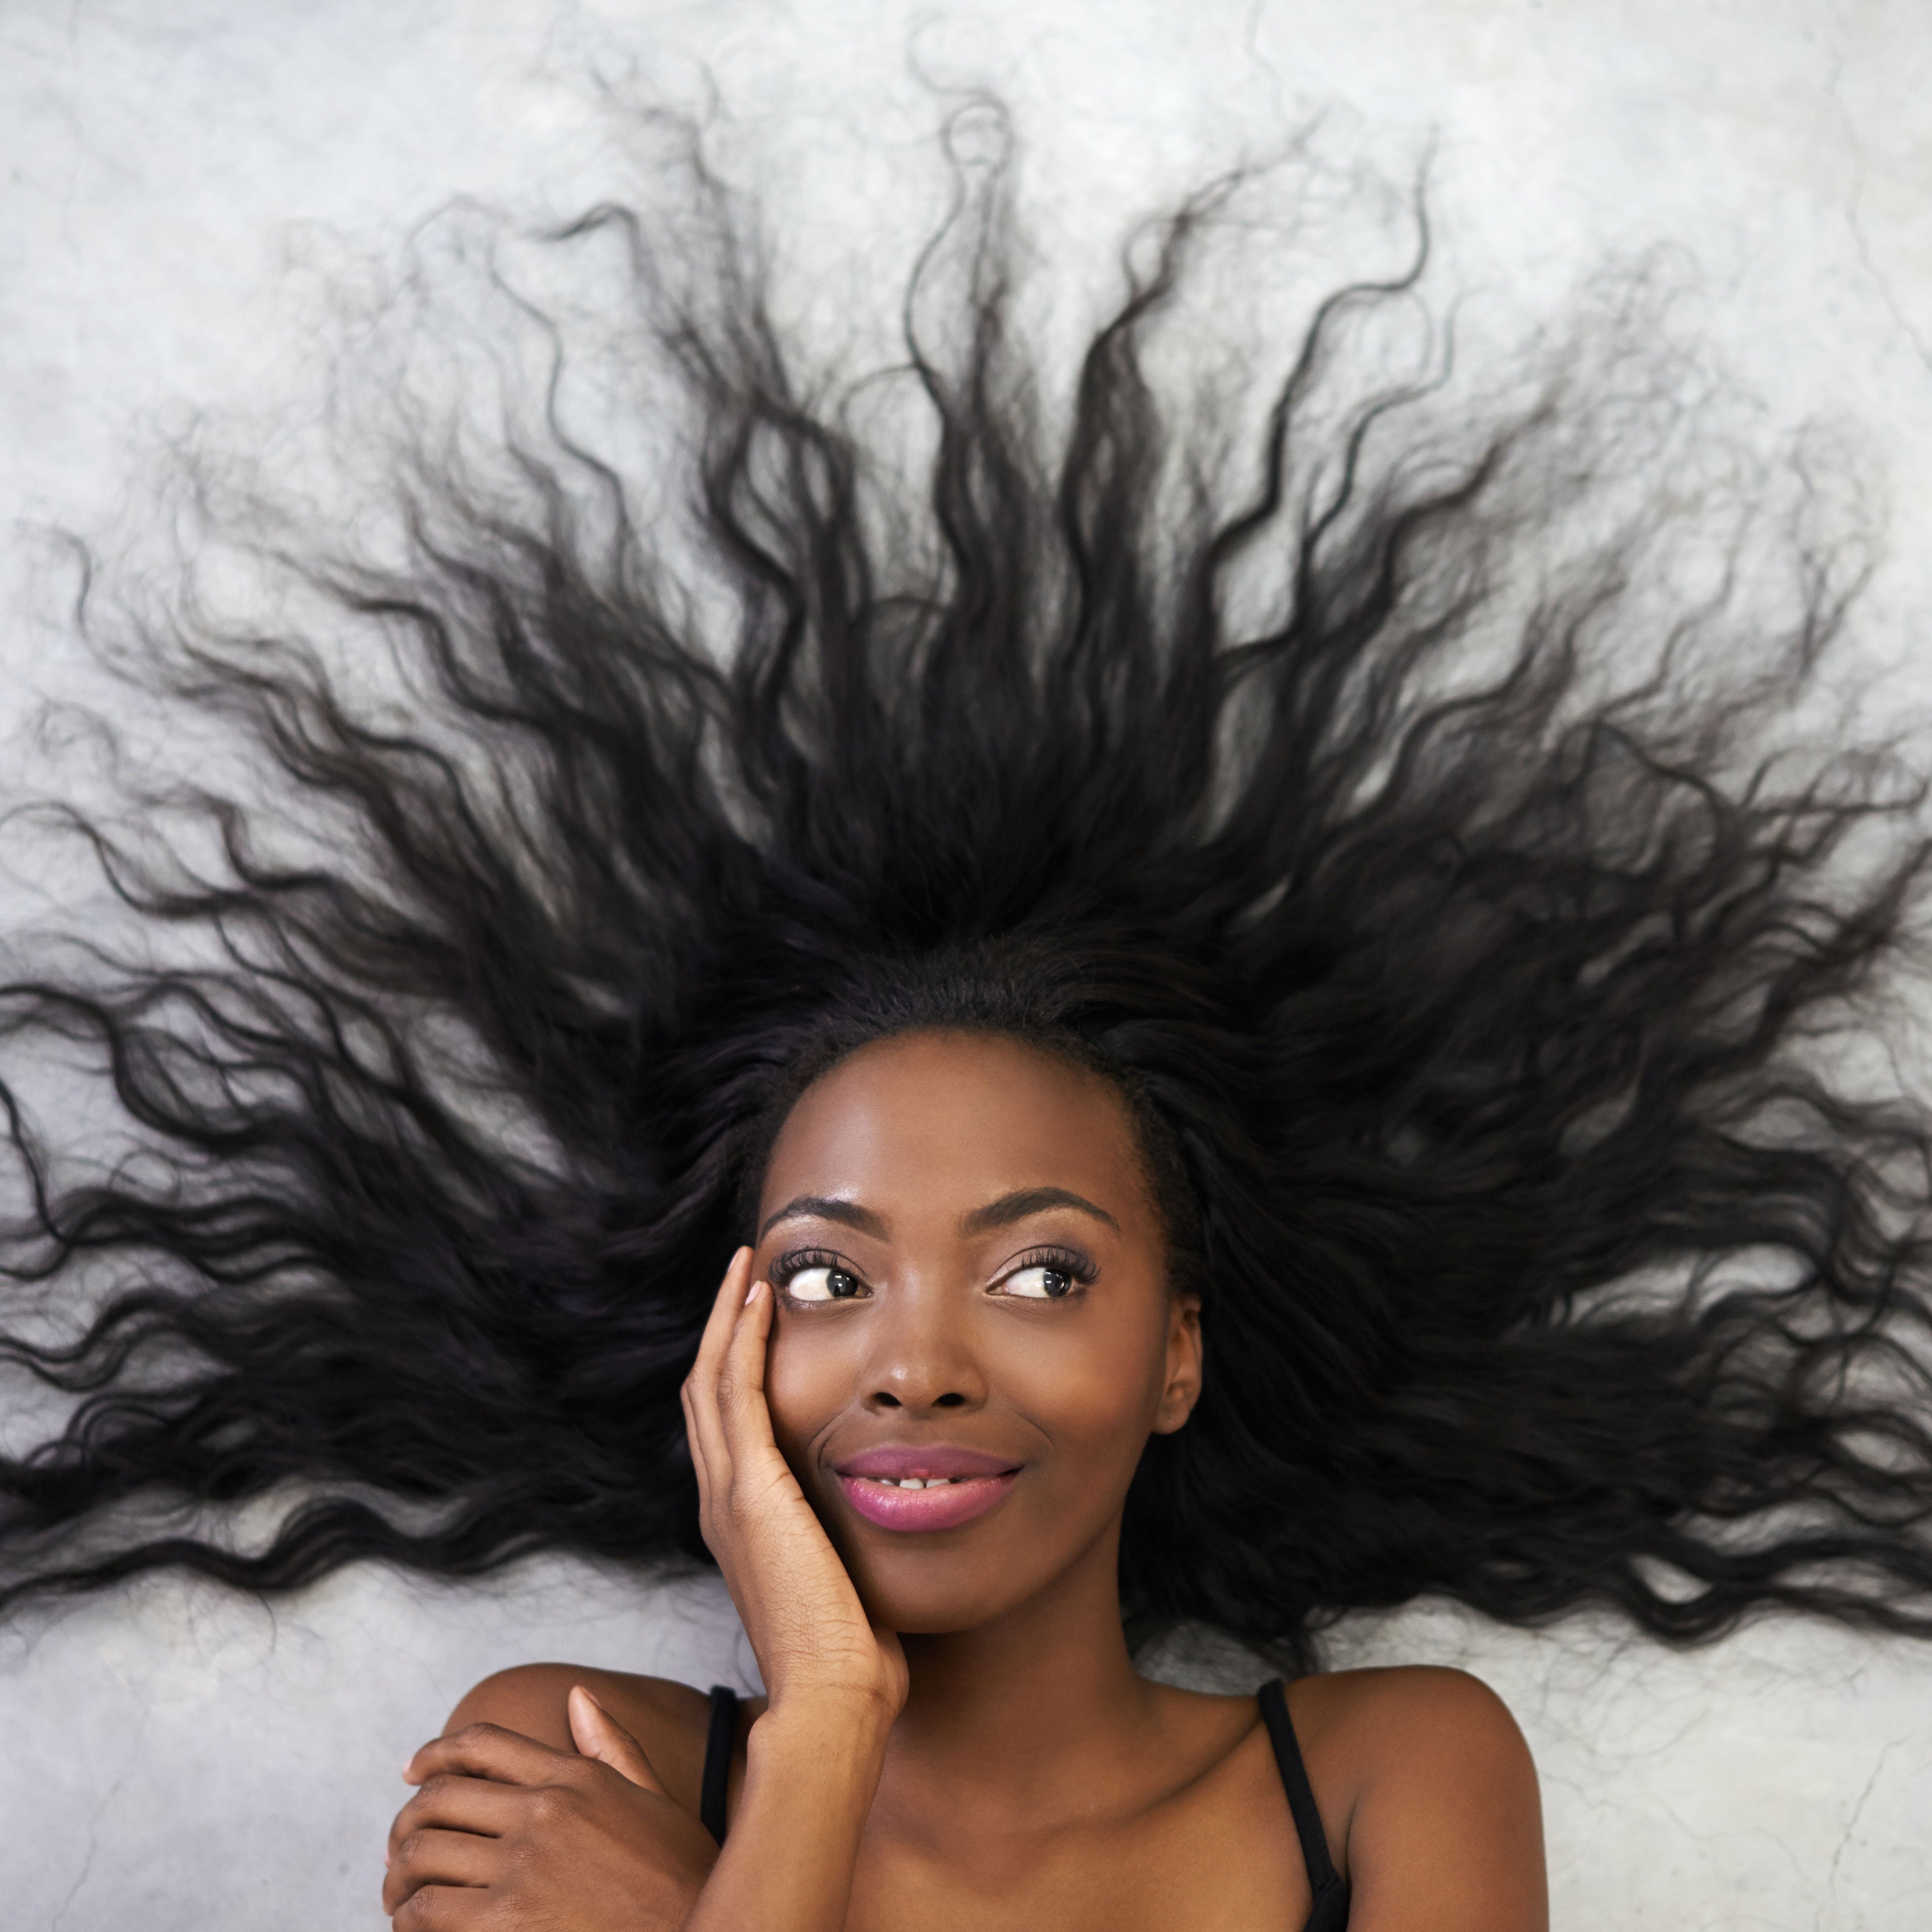 How To Maintain Relaxed Hair That's Healthy and Happy